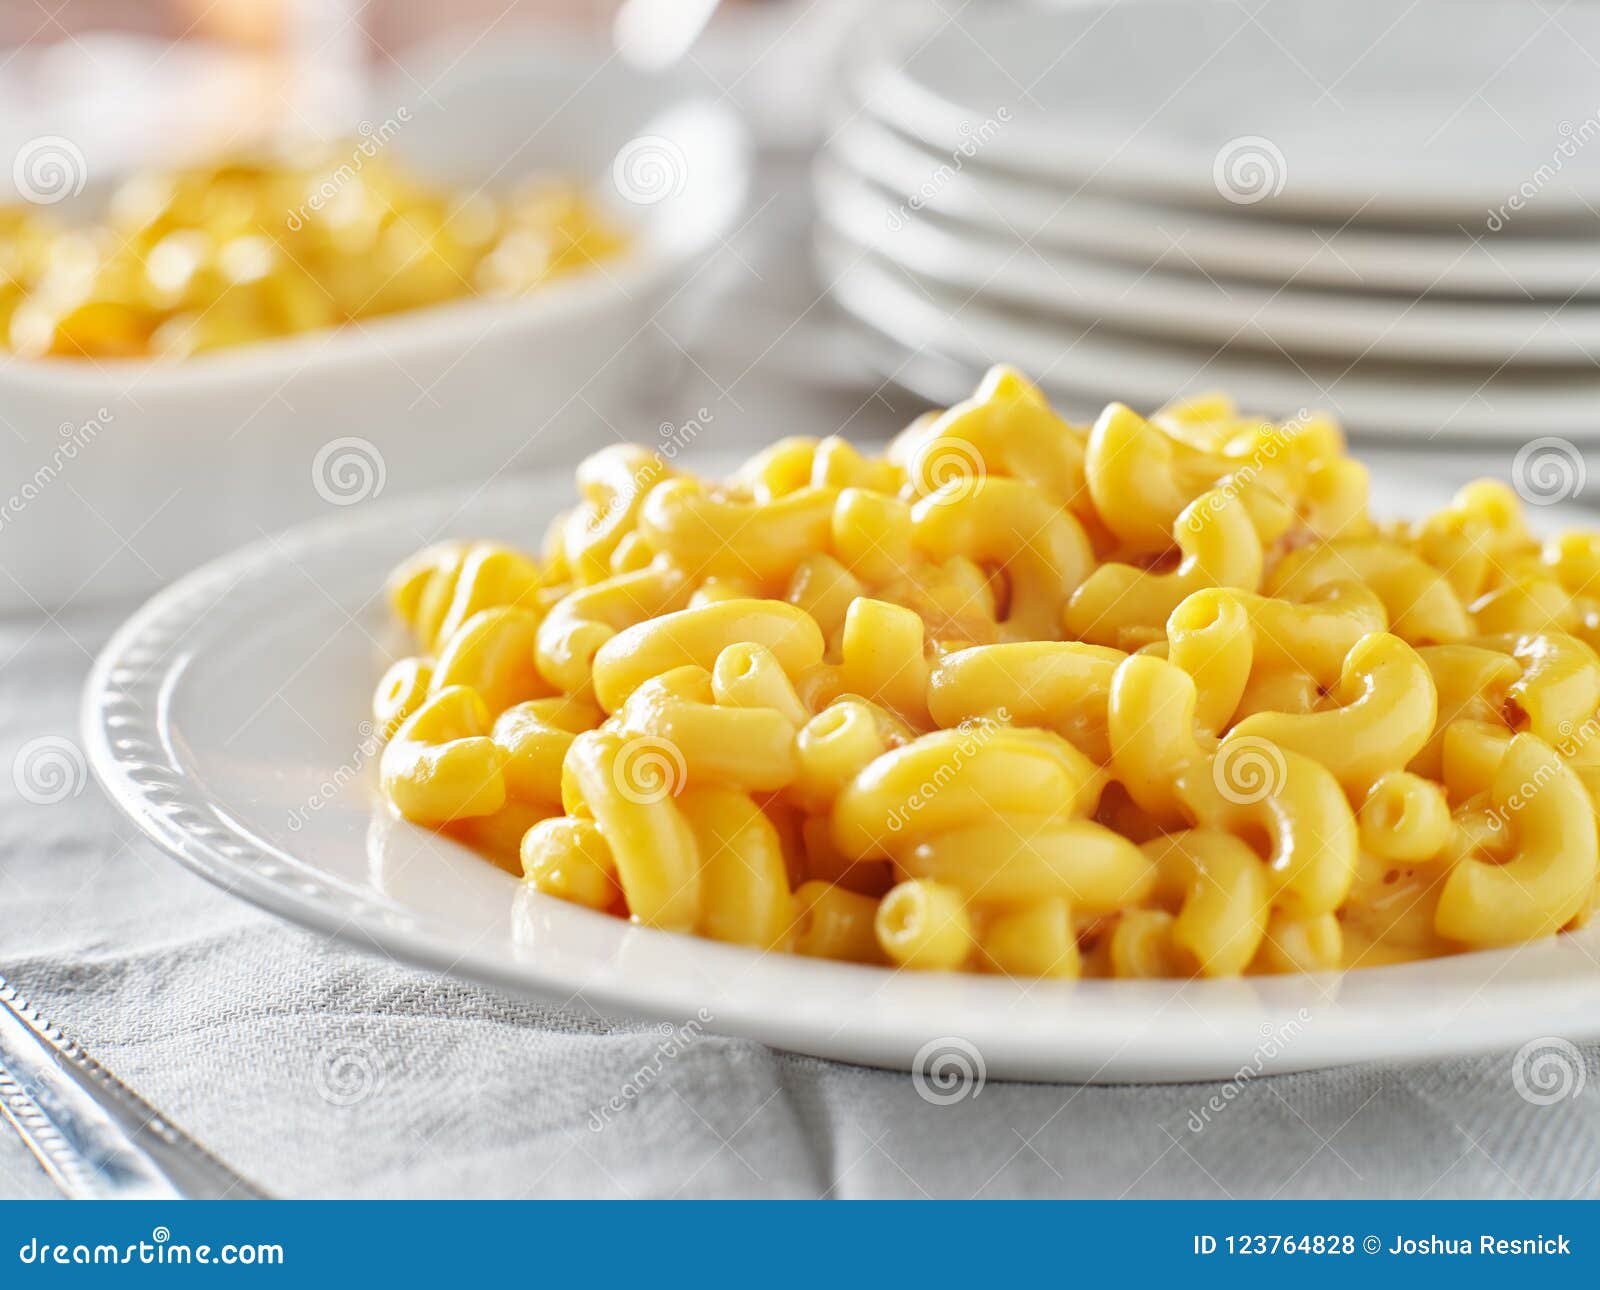 tasty mac and cheese on plate close up